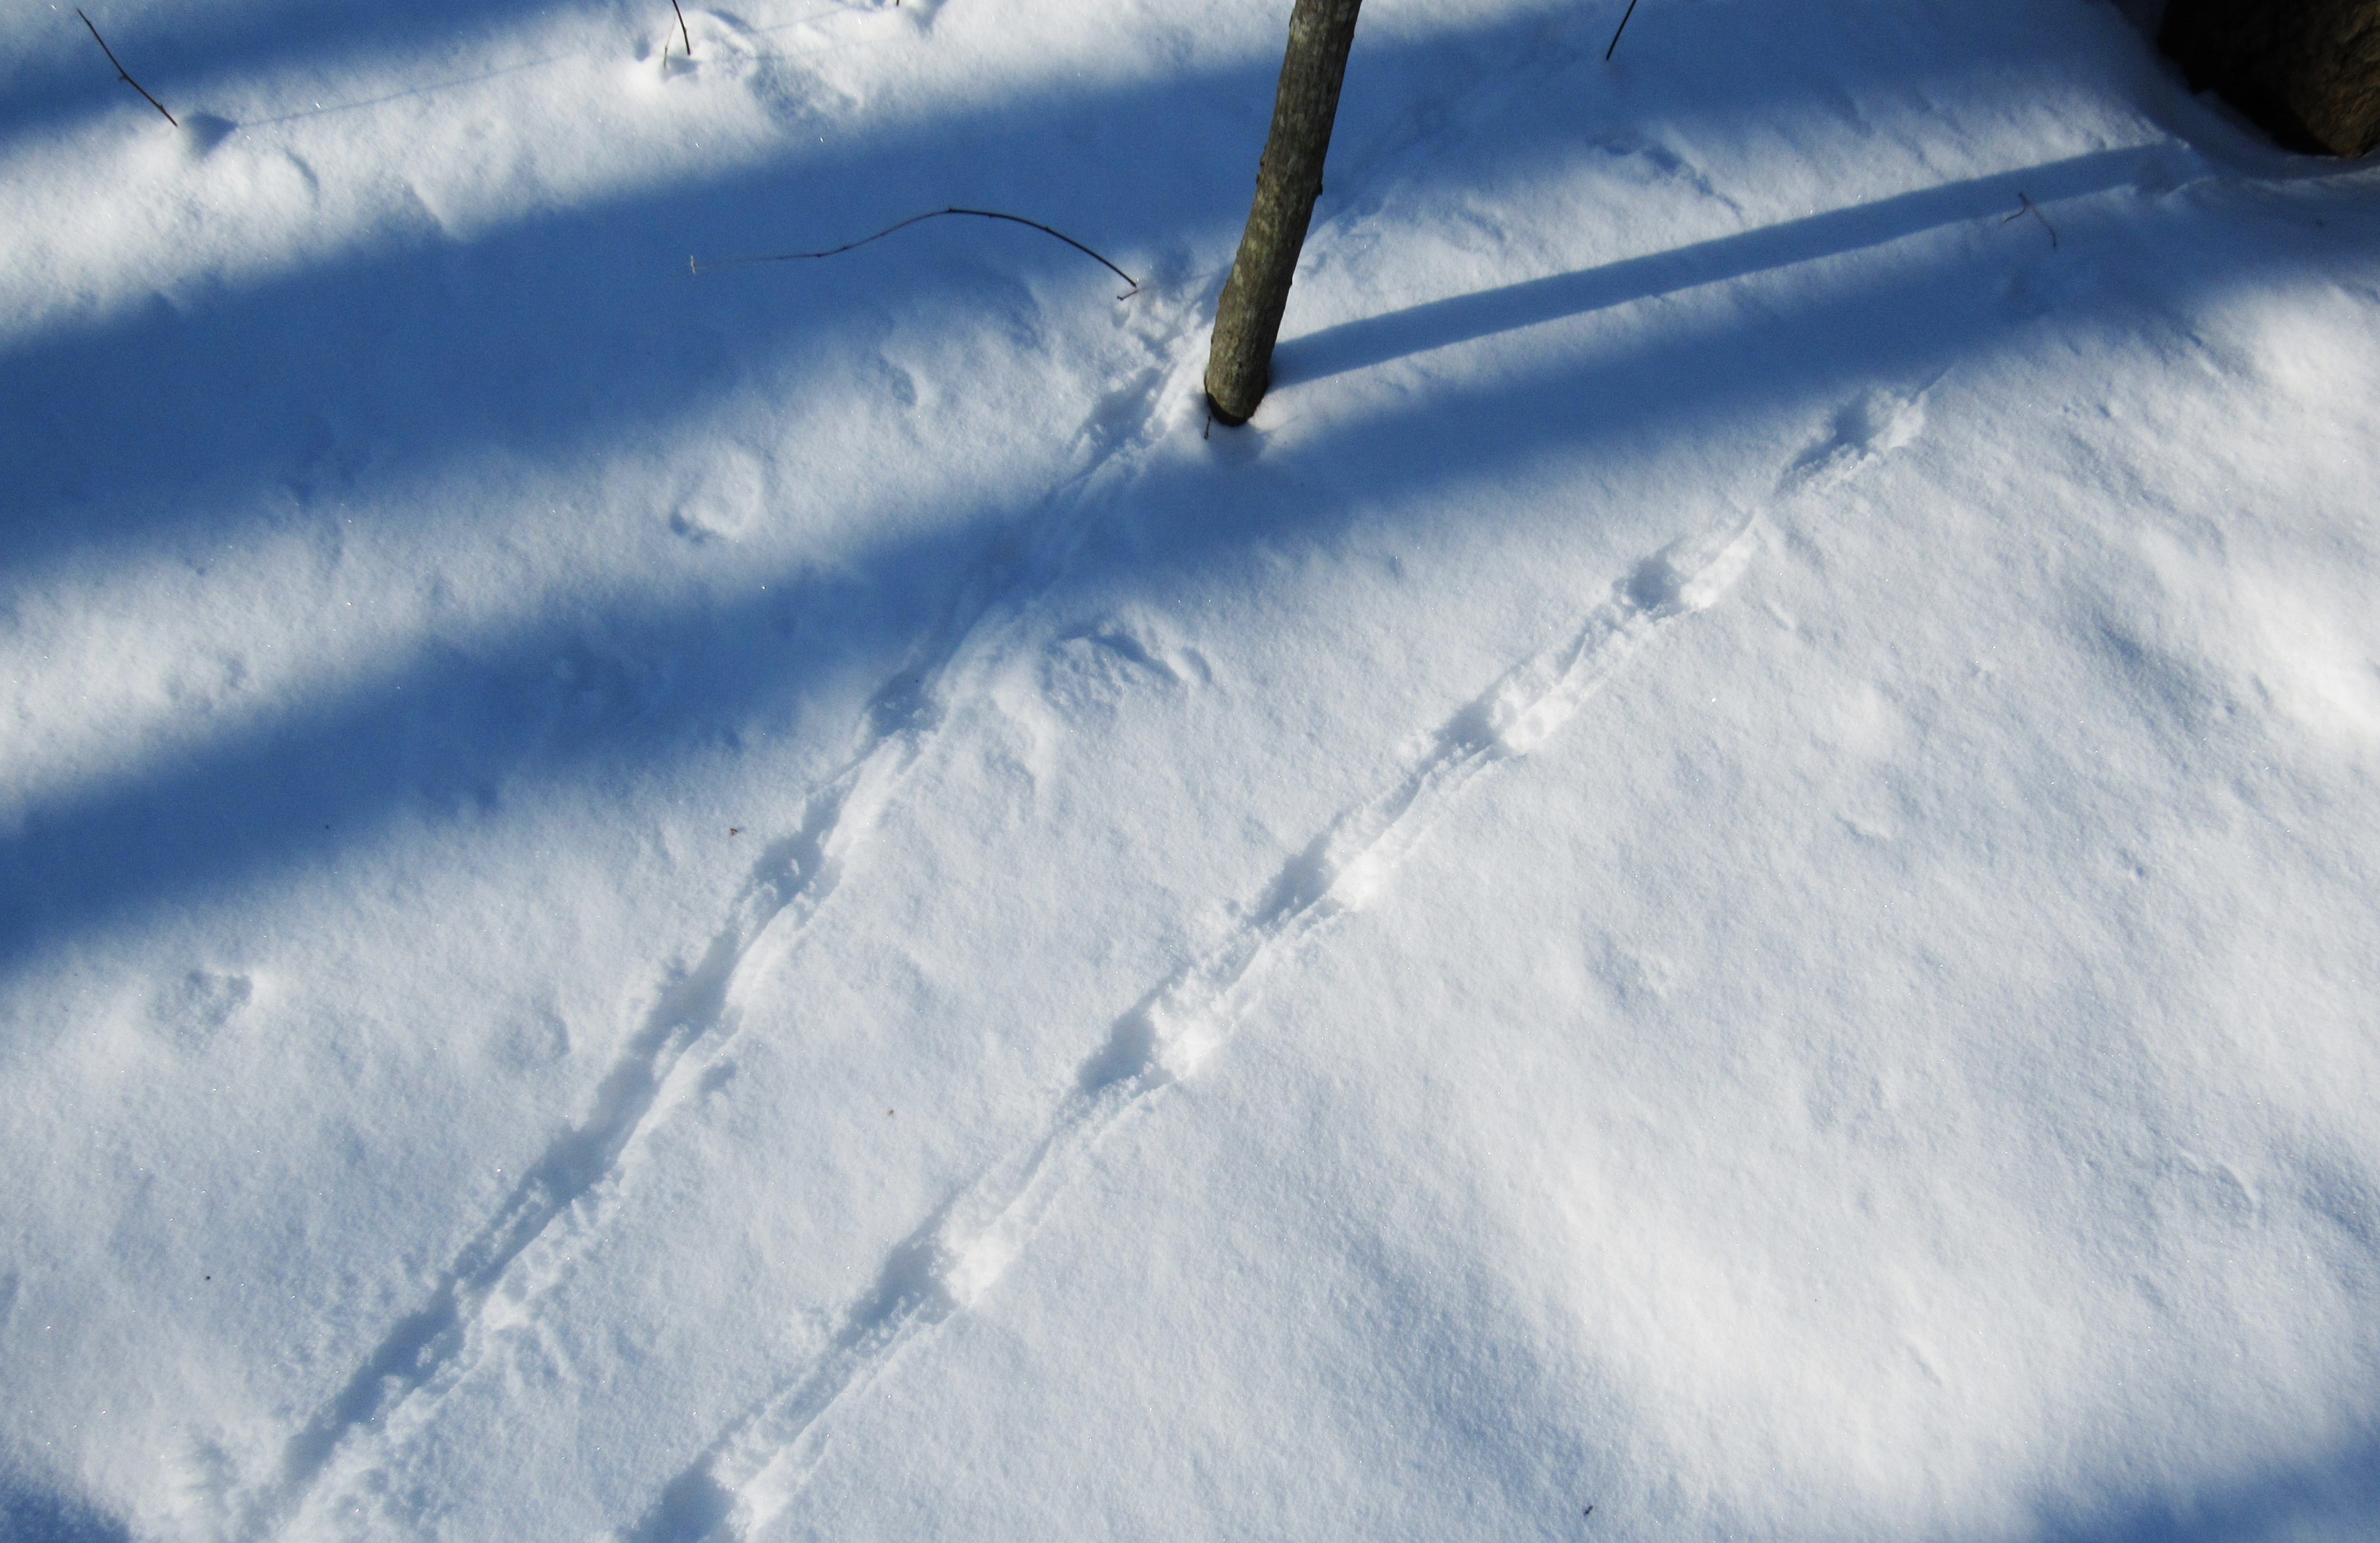 Mouse tracks in the snow